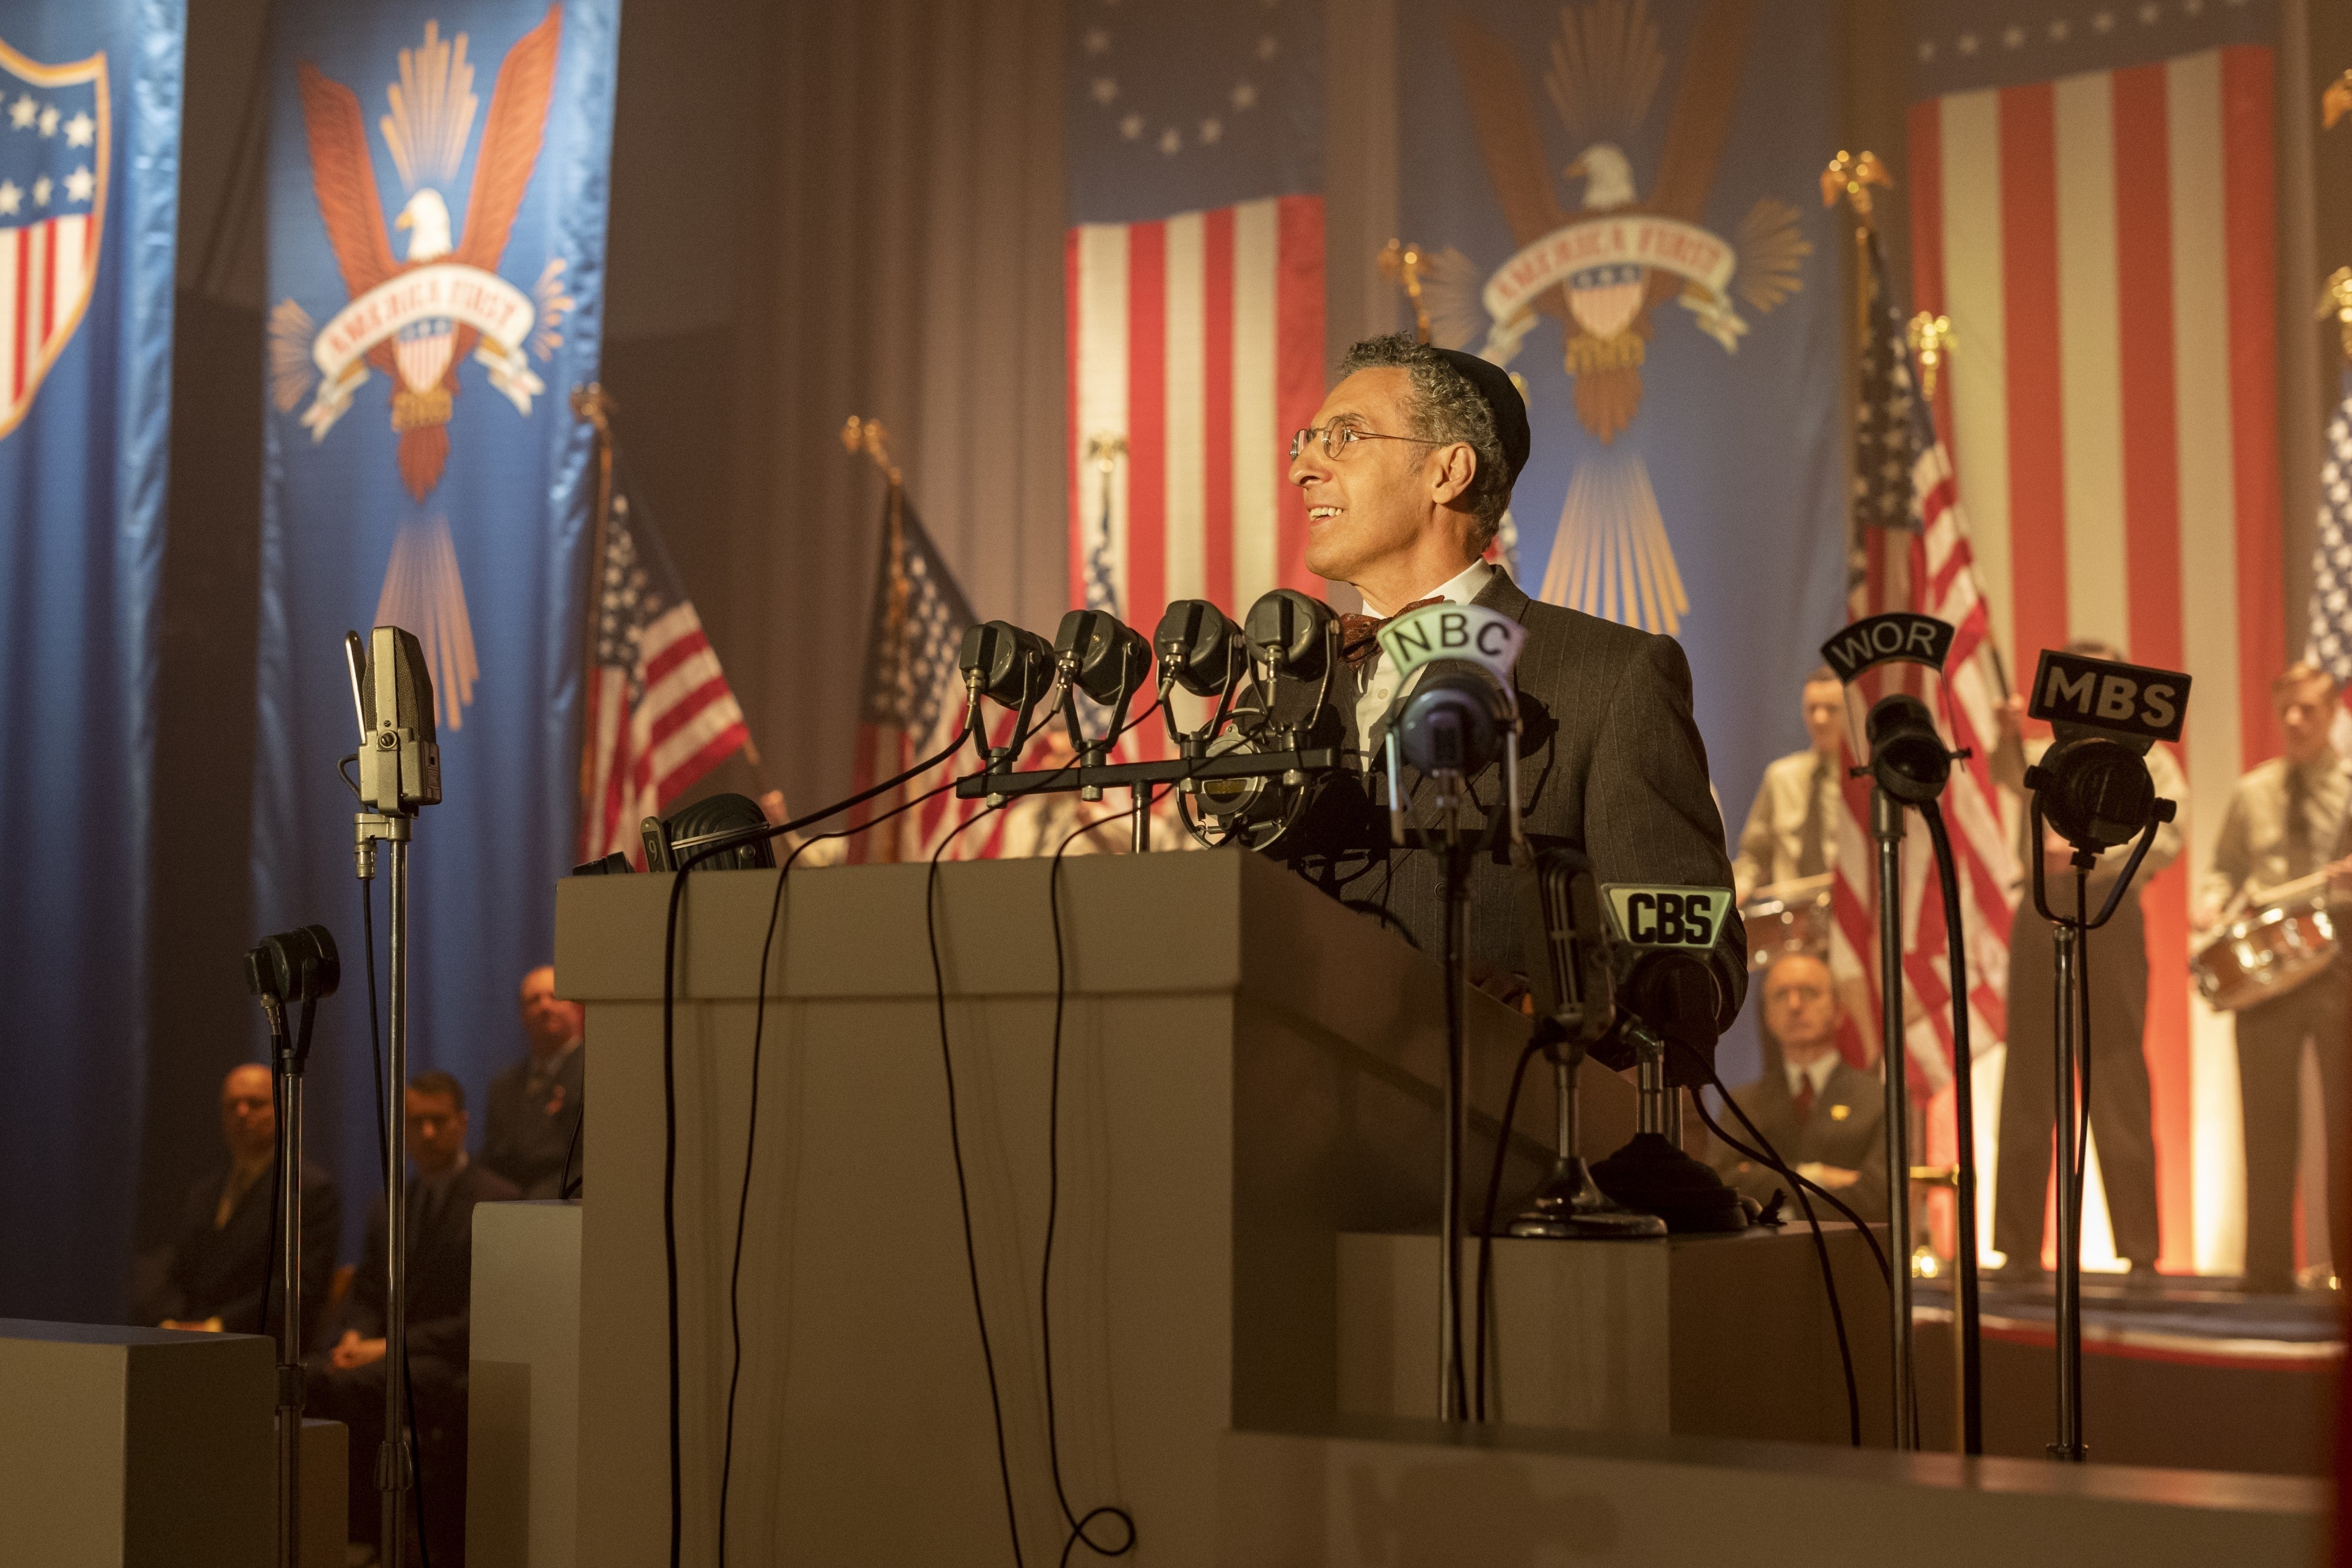 John Turturro stands at a podium, surrounded by microphones and American flags.